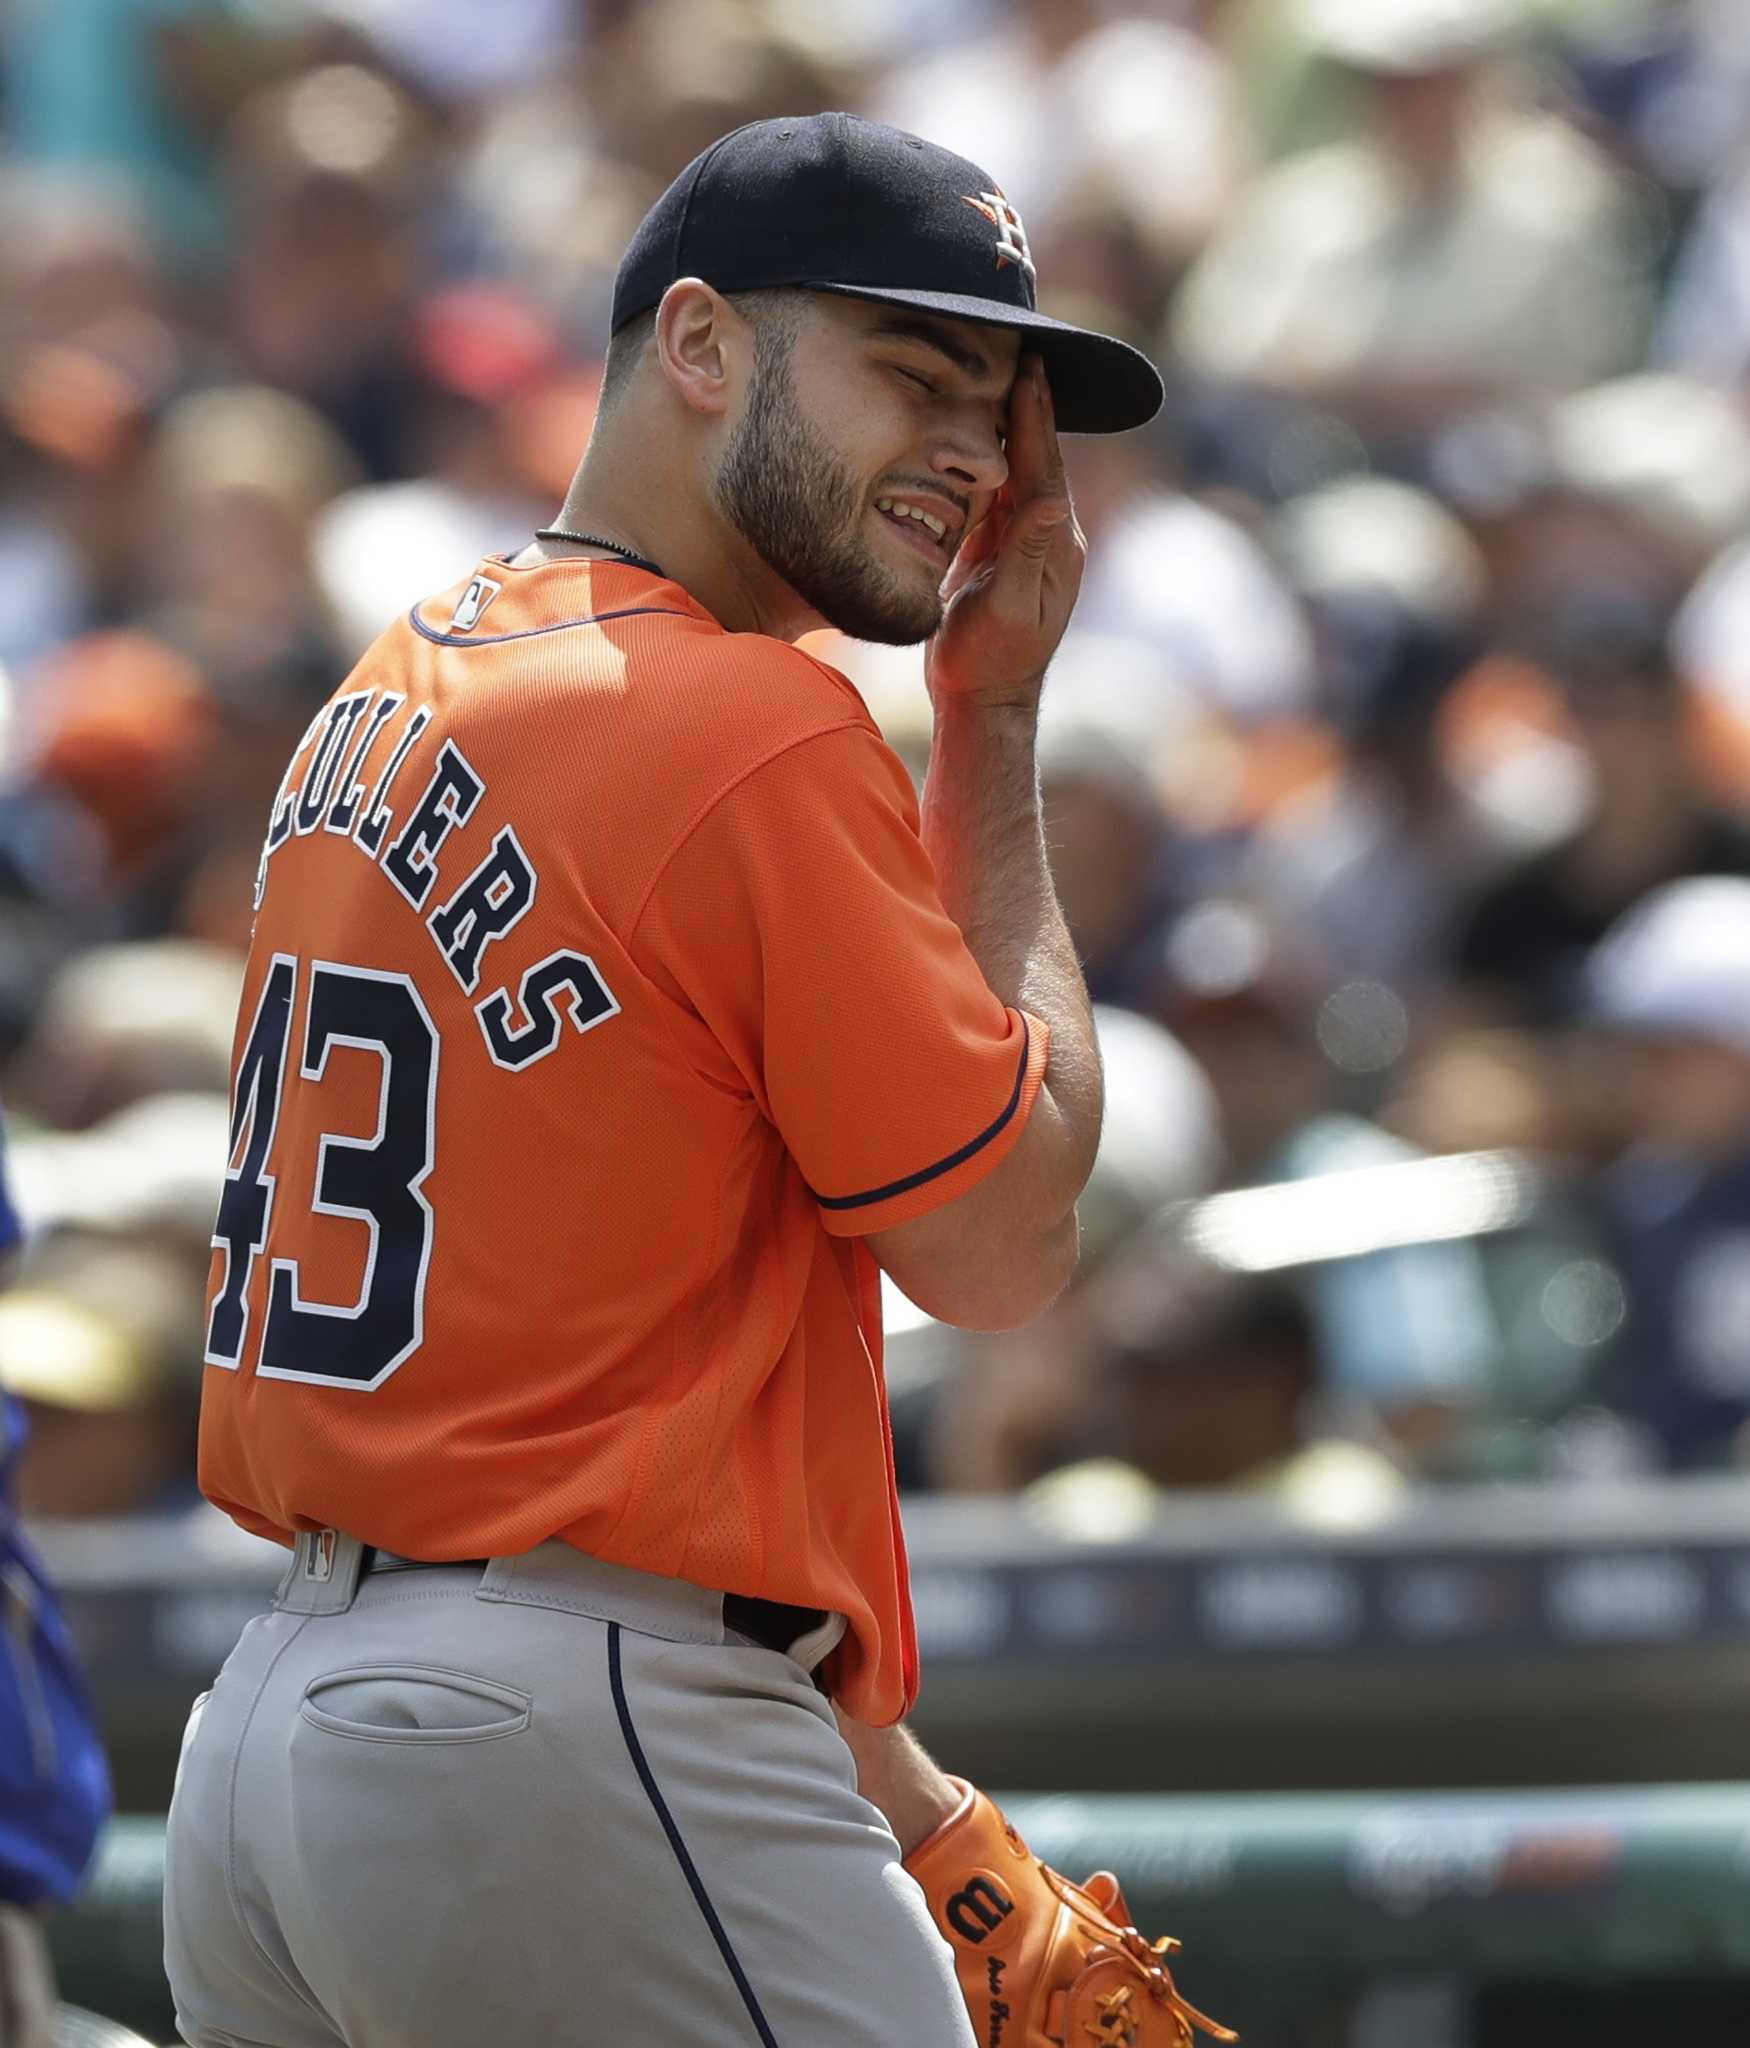 Motown blues: Tigers hand Astros most lopsided defeat of the season